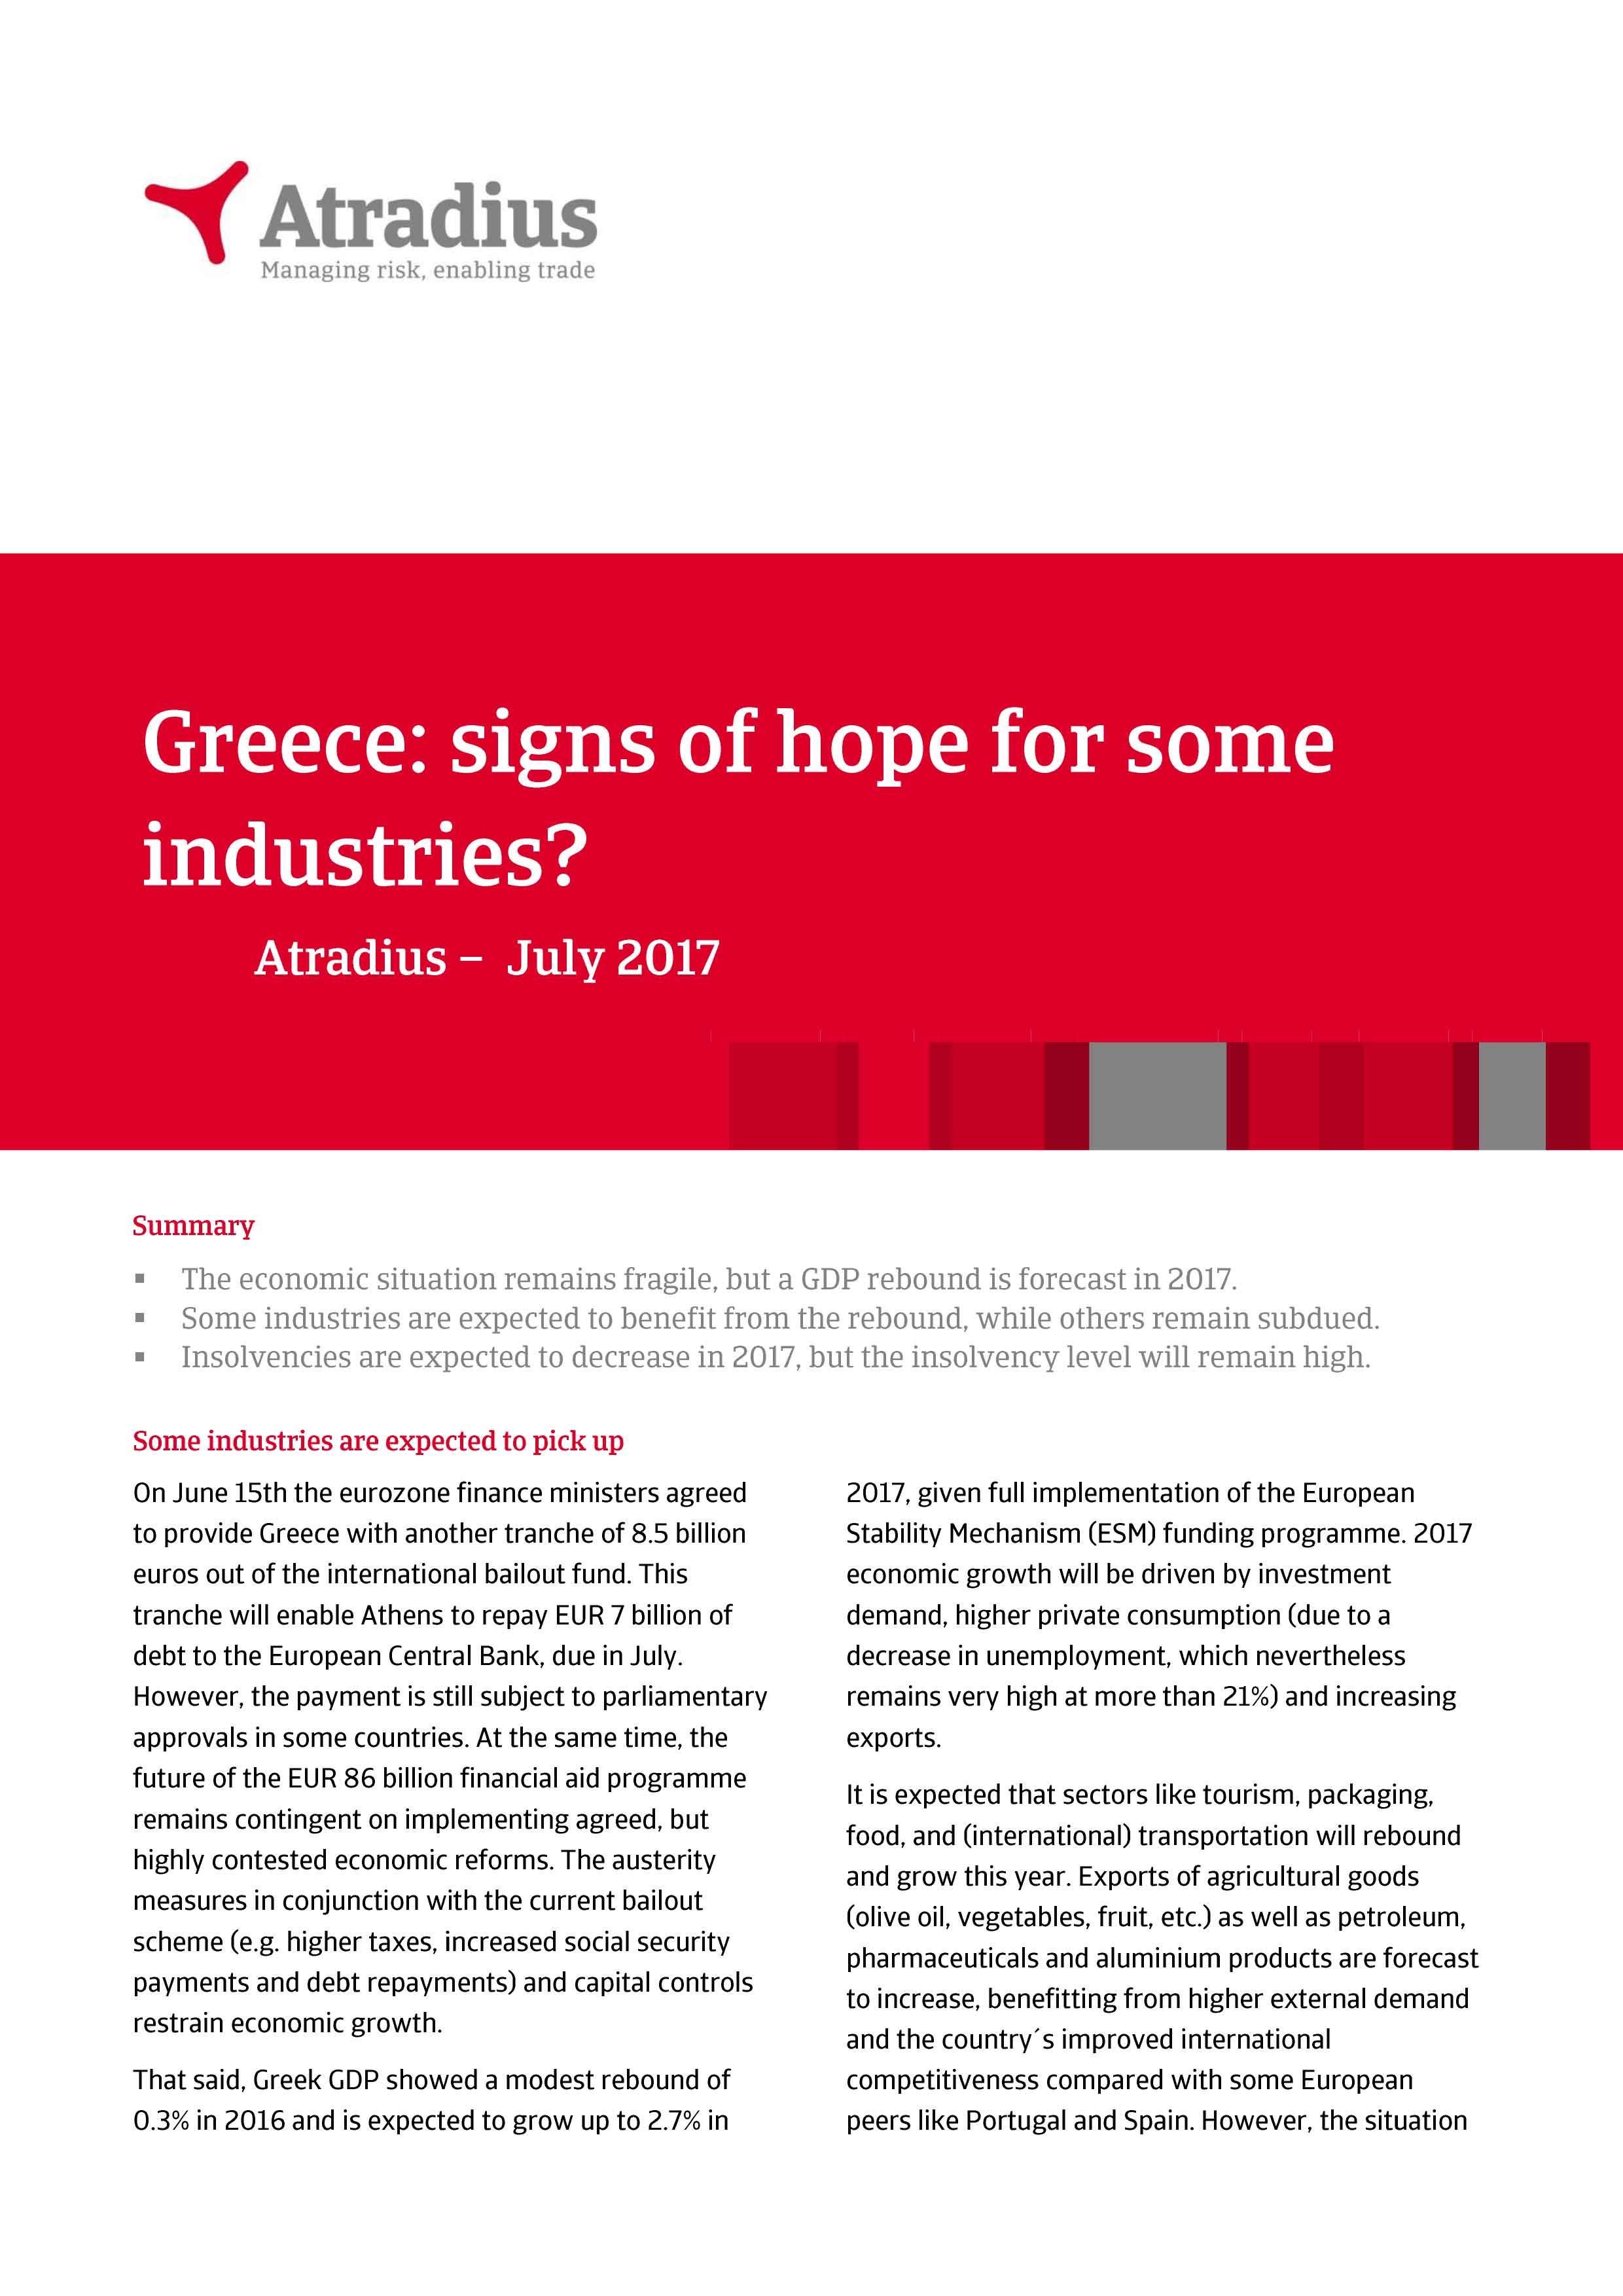 Greece: signs of hope for some industries?